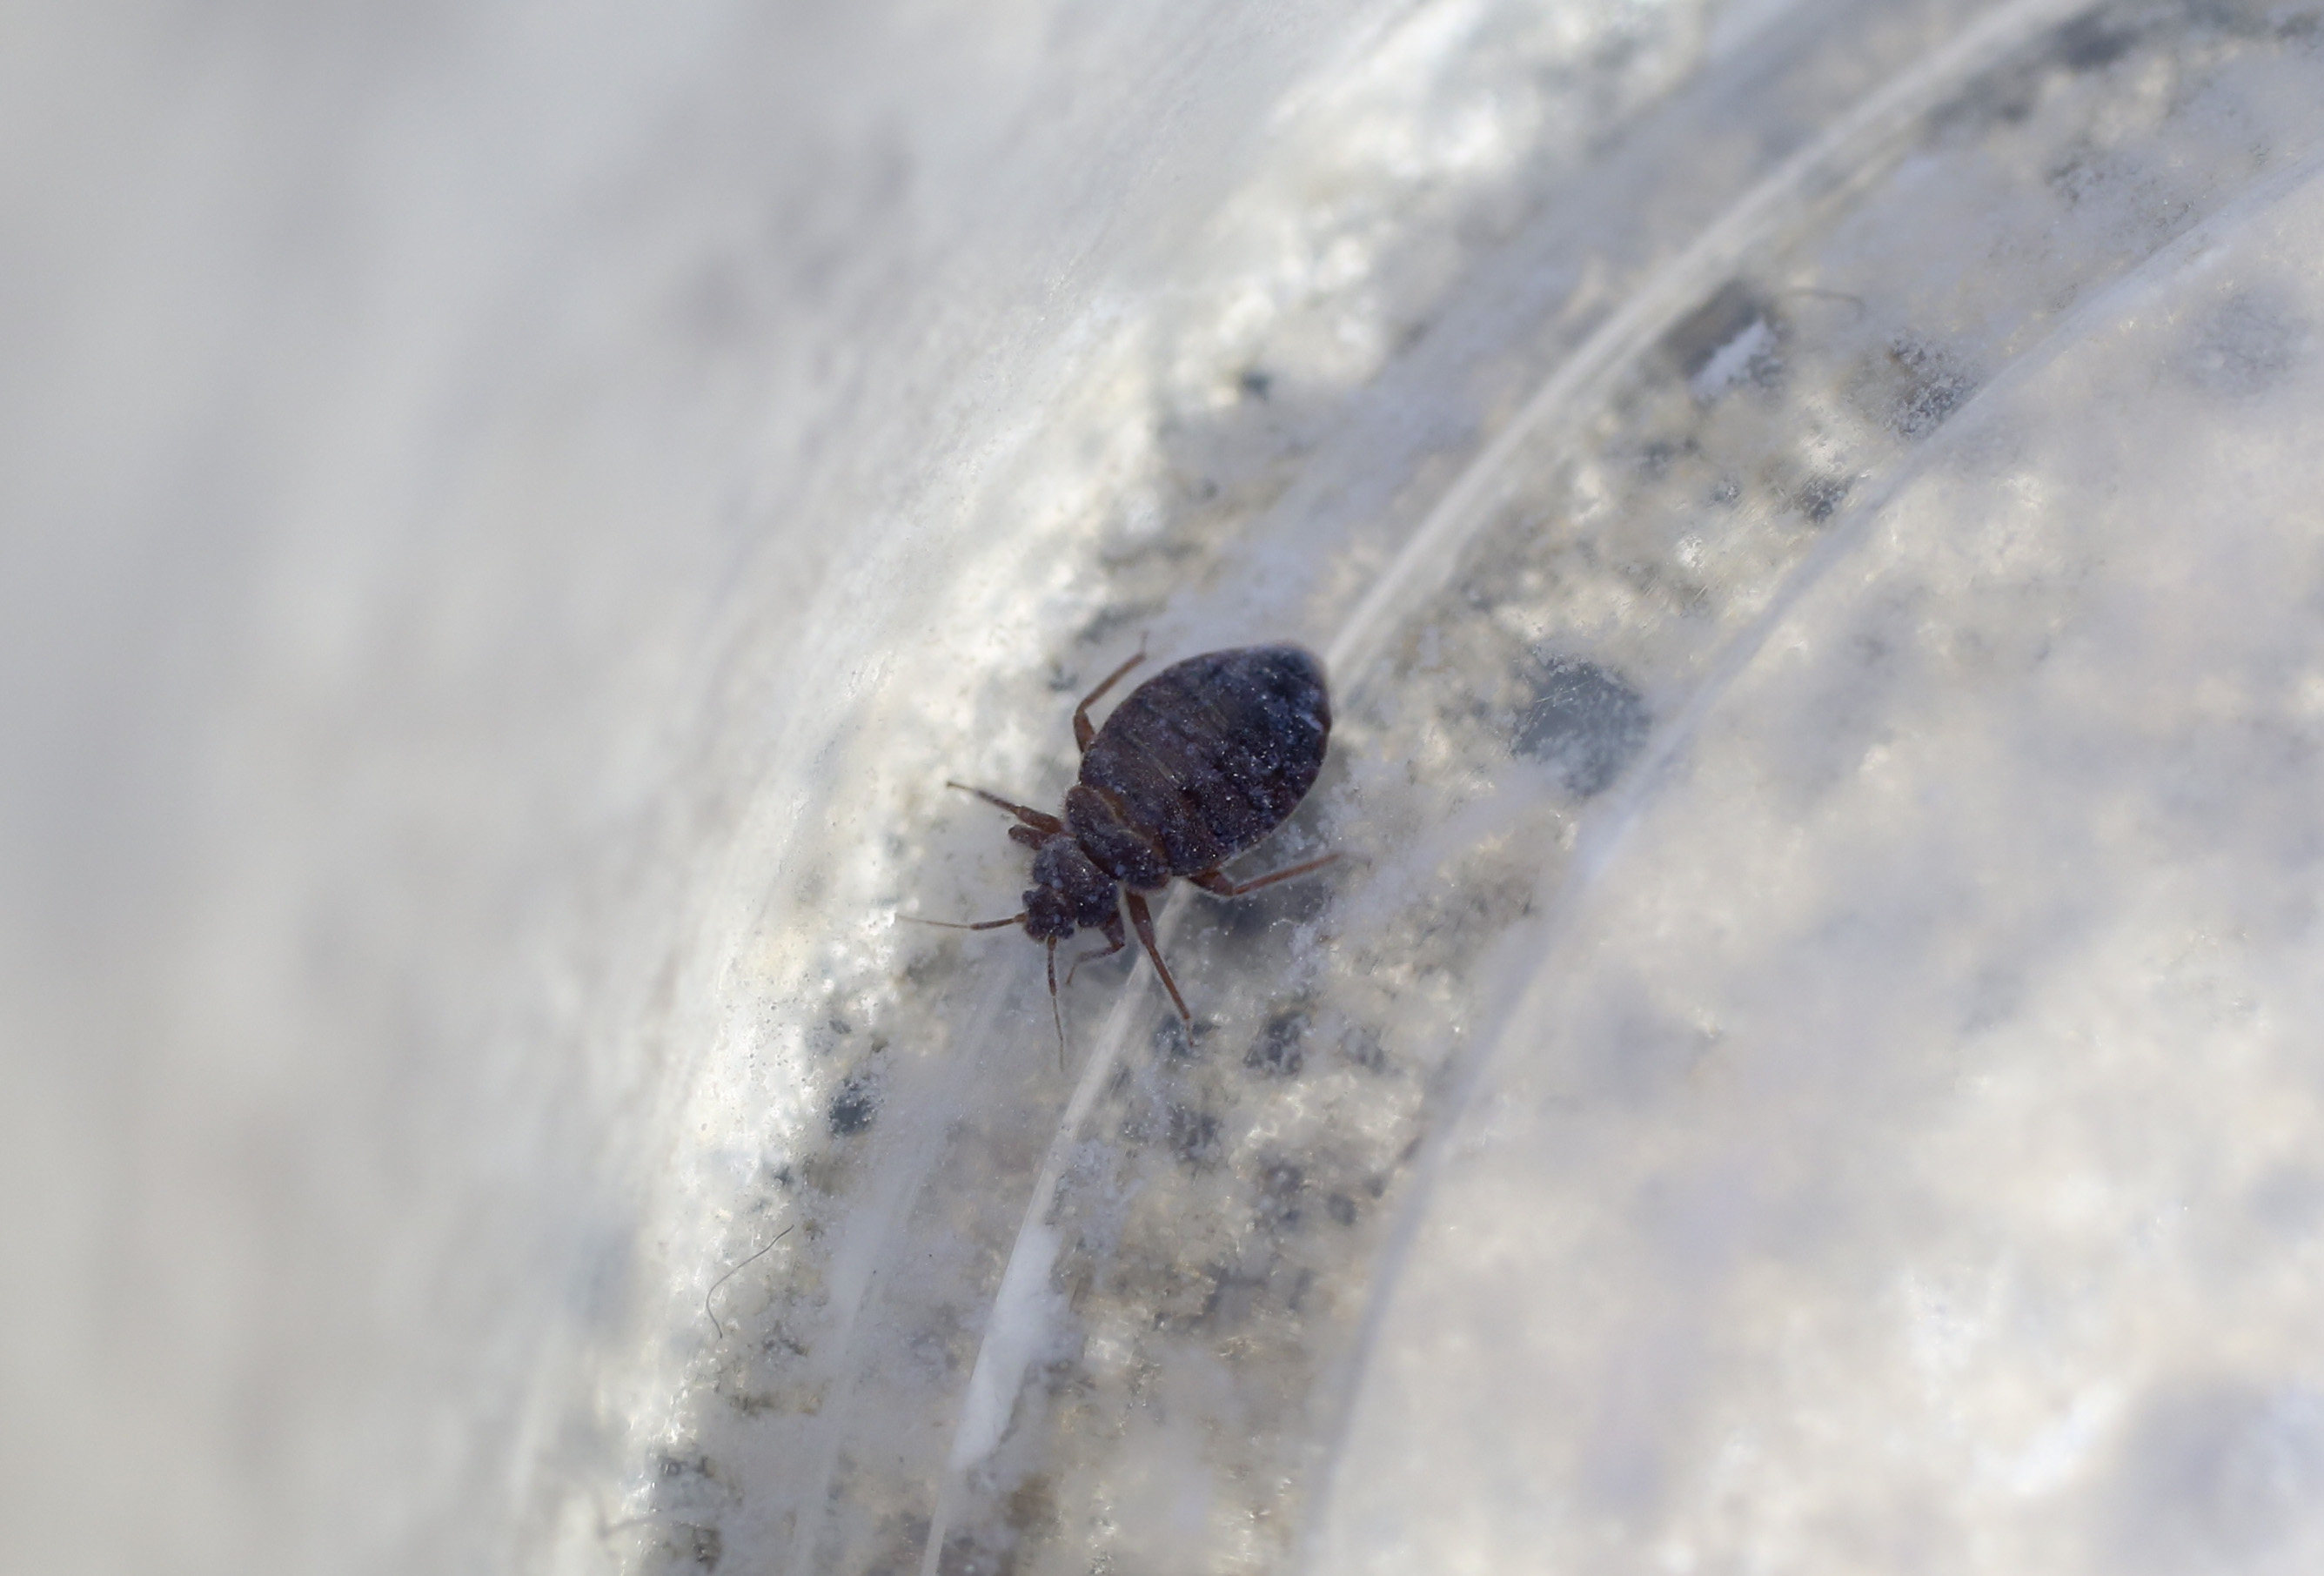 Bedbugs in South Korea, Paris and London have sparked concerns that they could reach Hong Kong too. Photo: Edward Wong